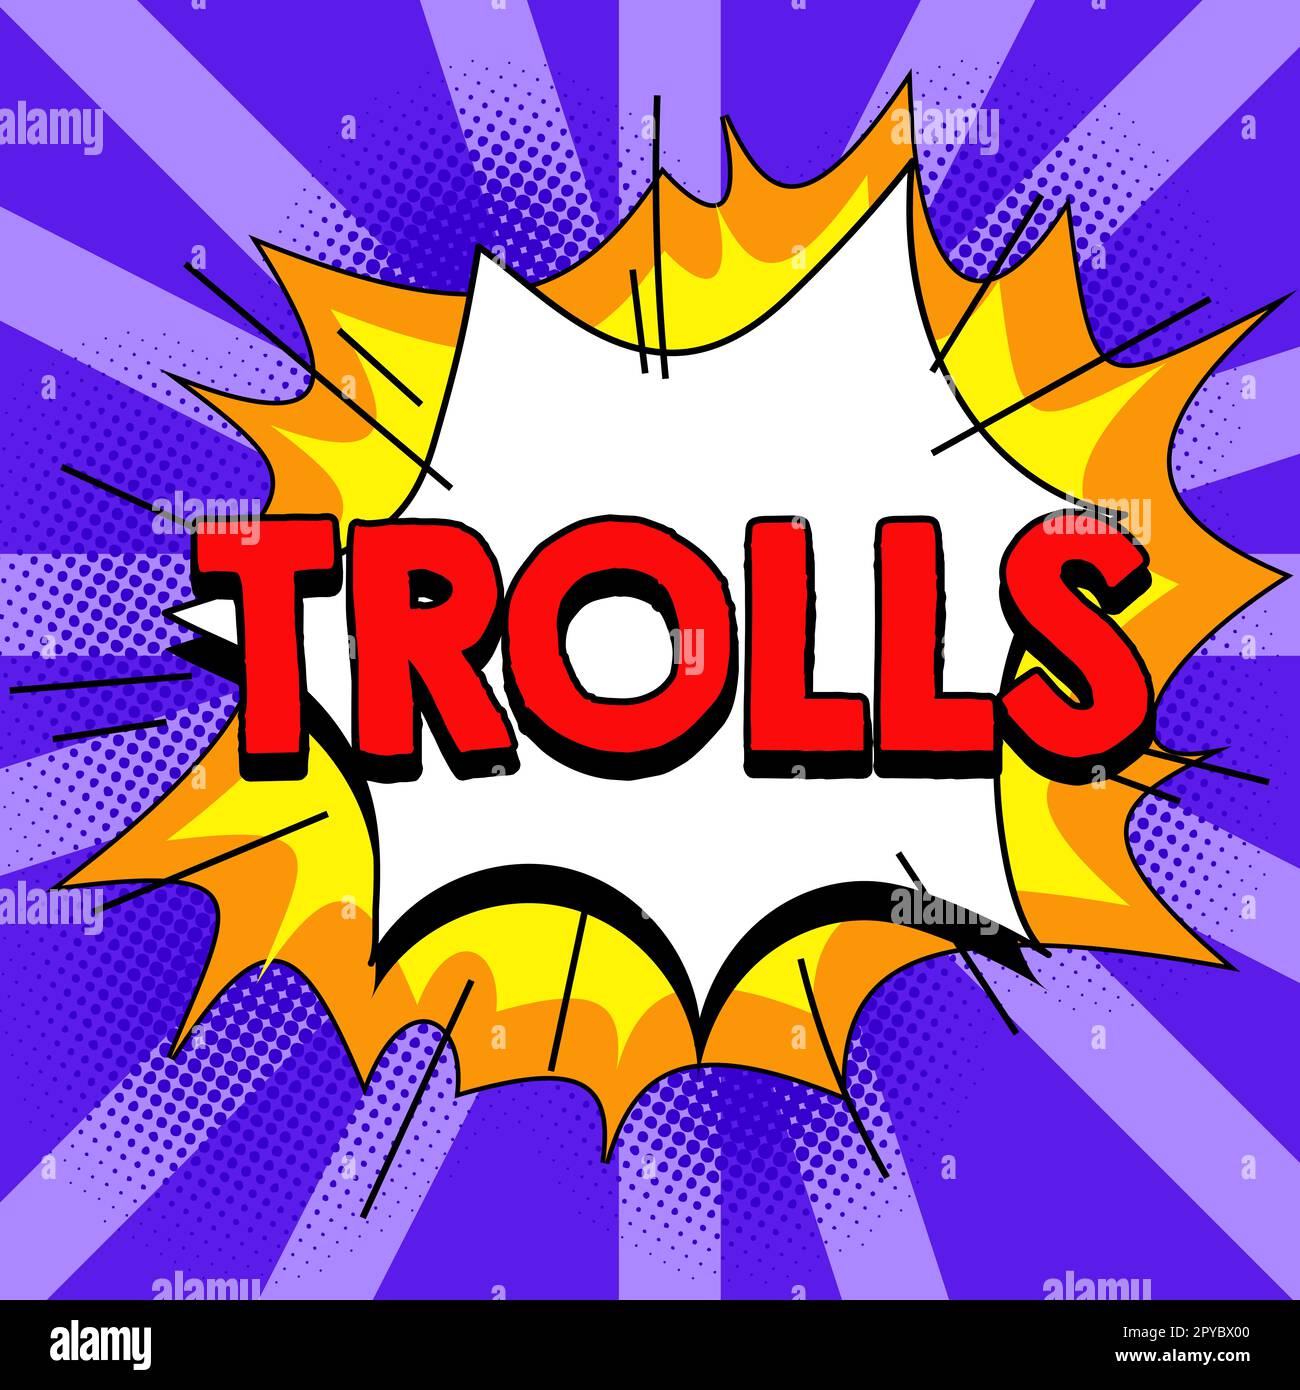 Conceptual display Trolls. Business idea Internet slang troll person who starts upsets people on Internet Stock Photo